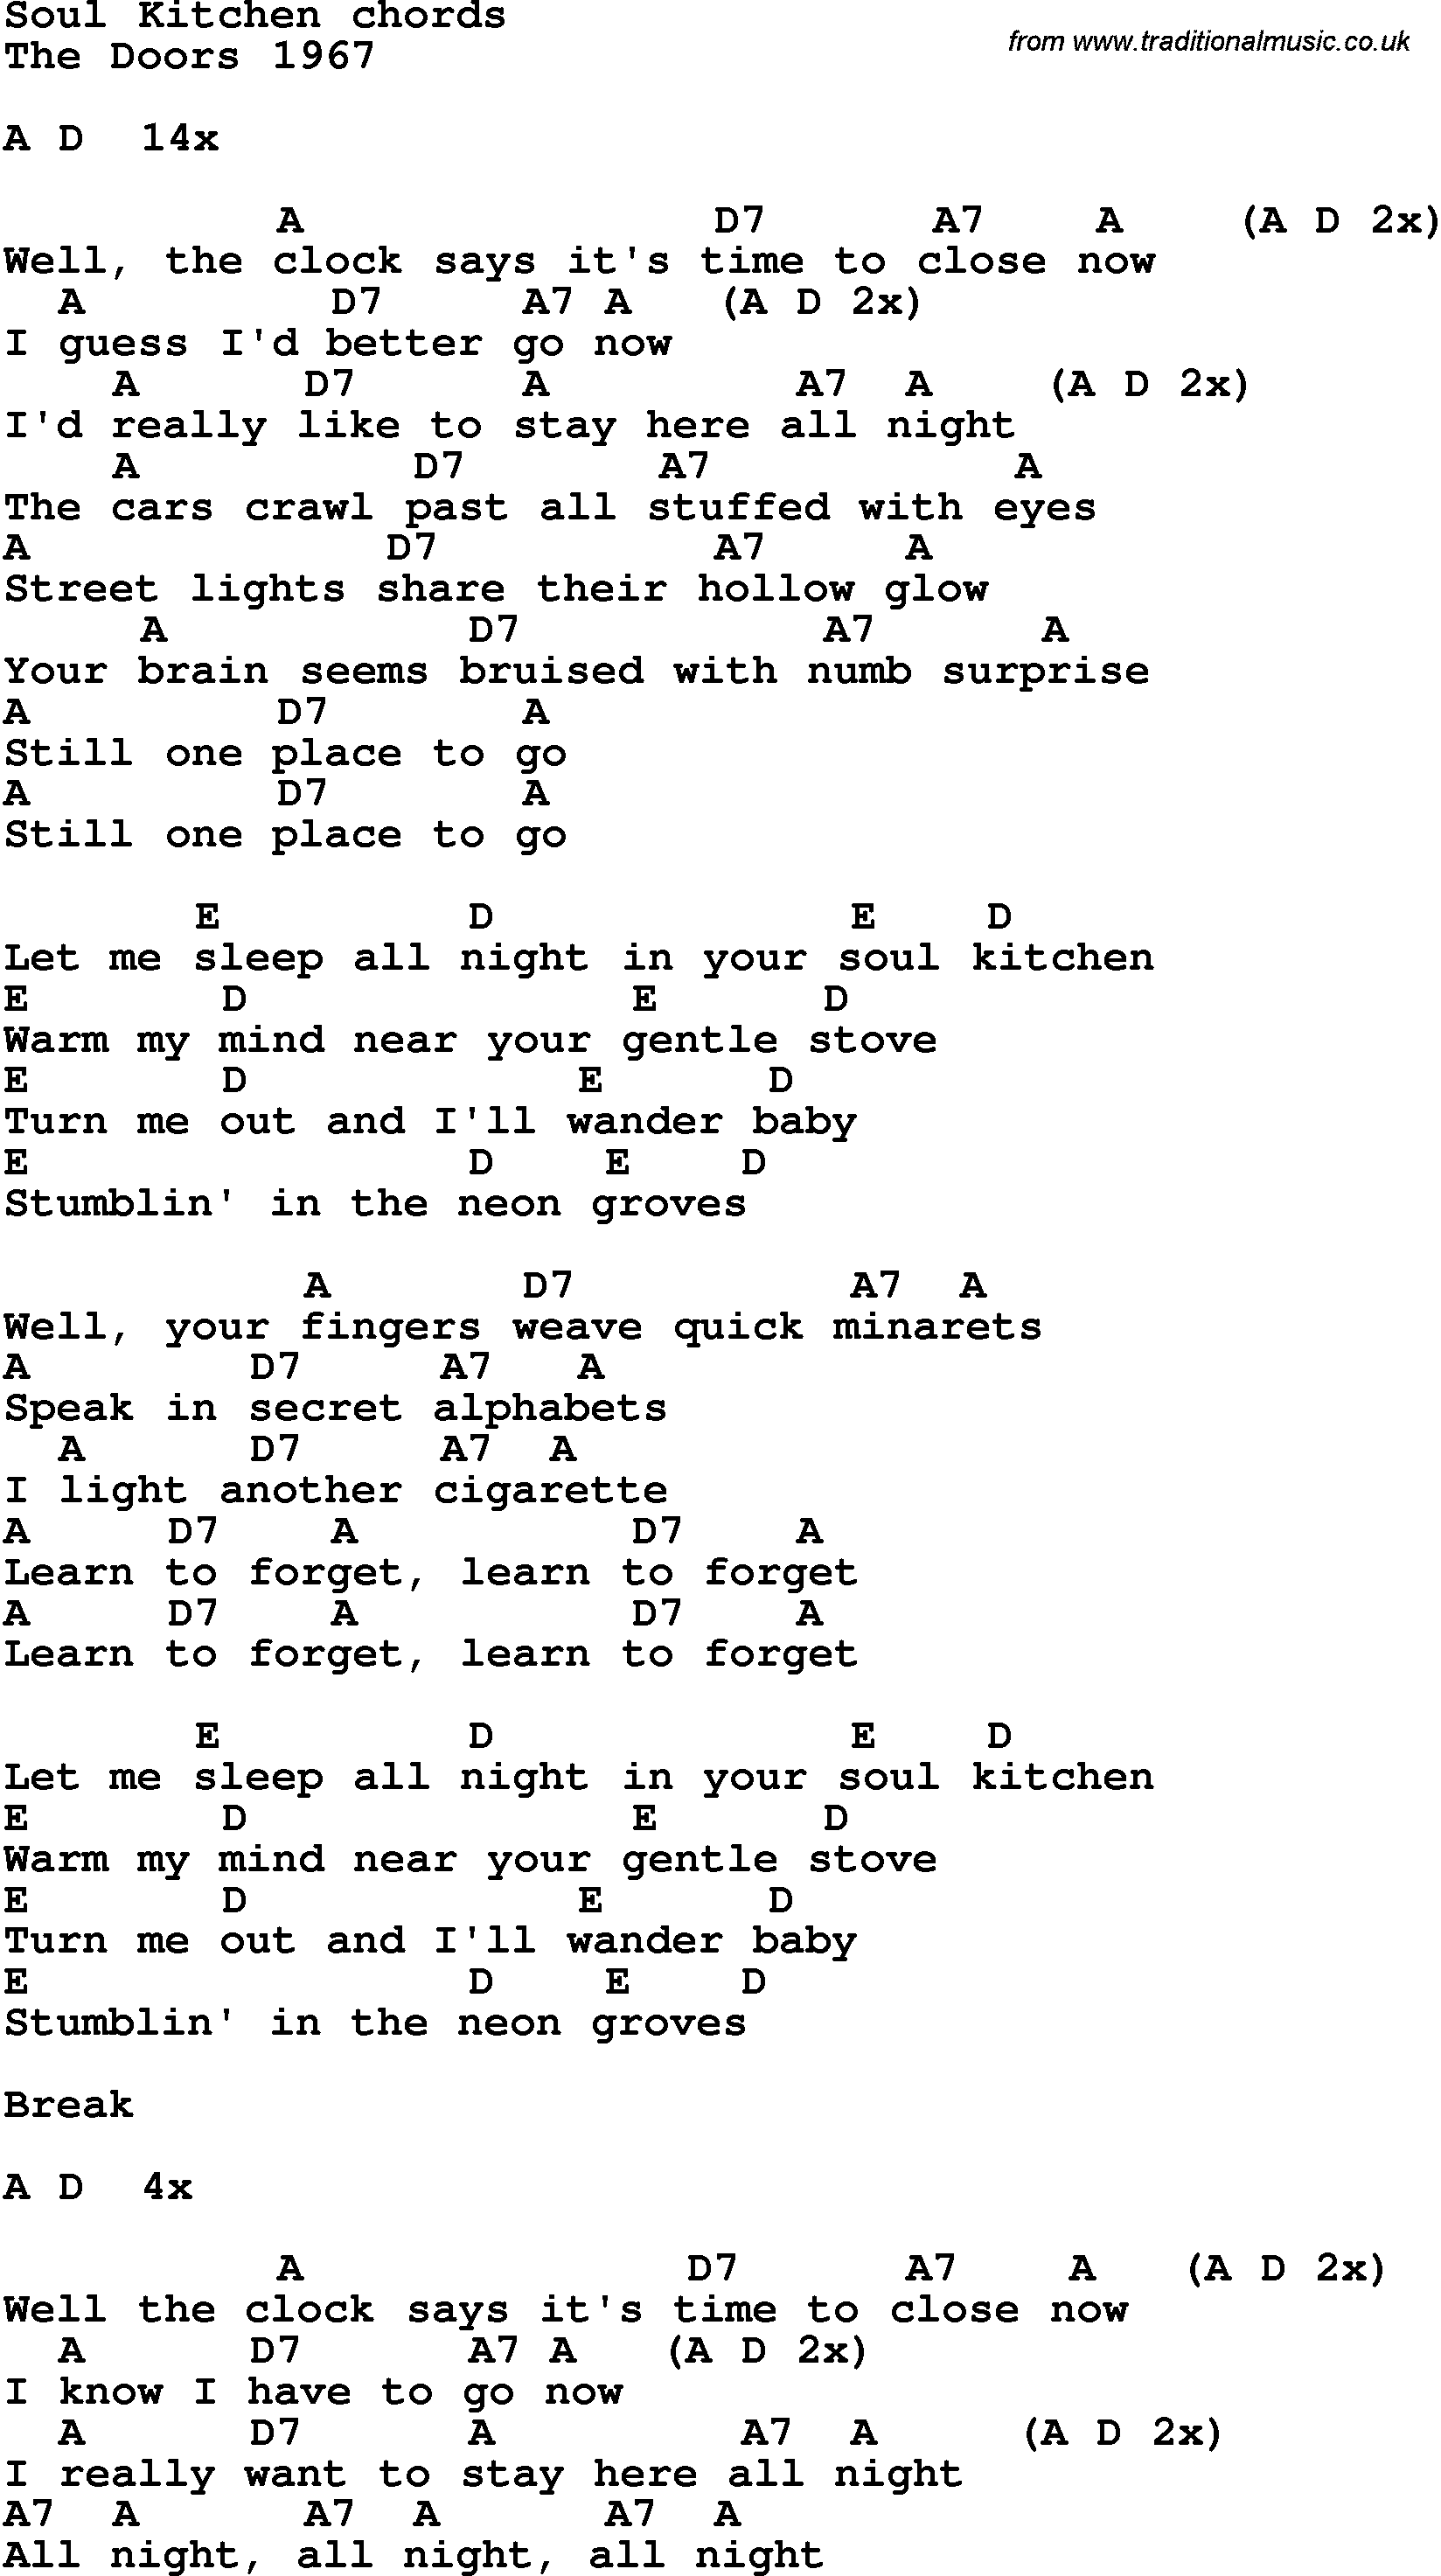 Song Lyrics with guitar chords for Soul Kitchen